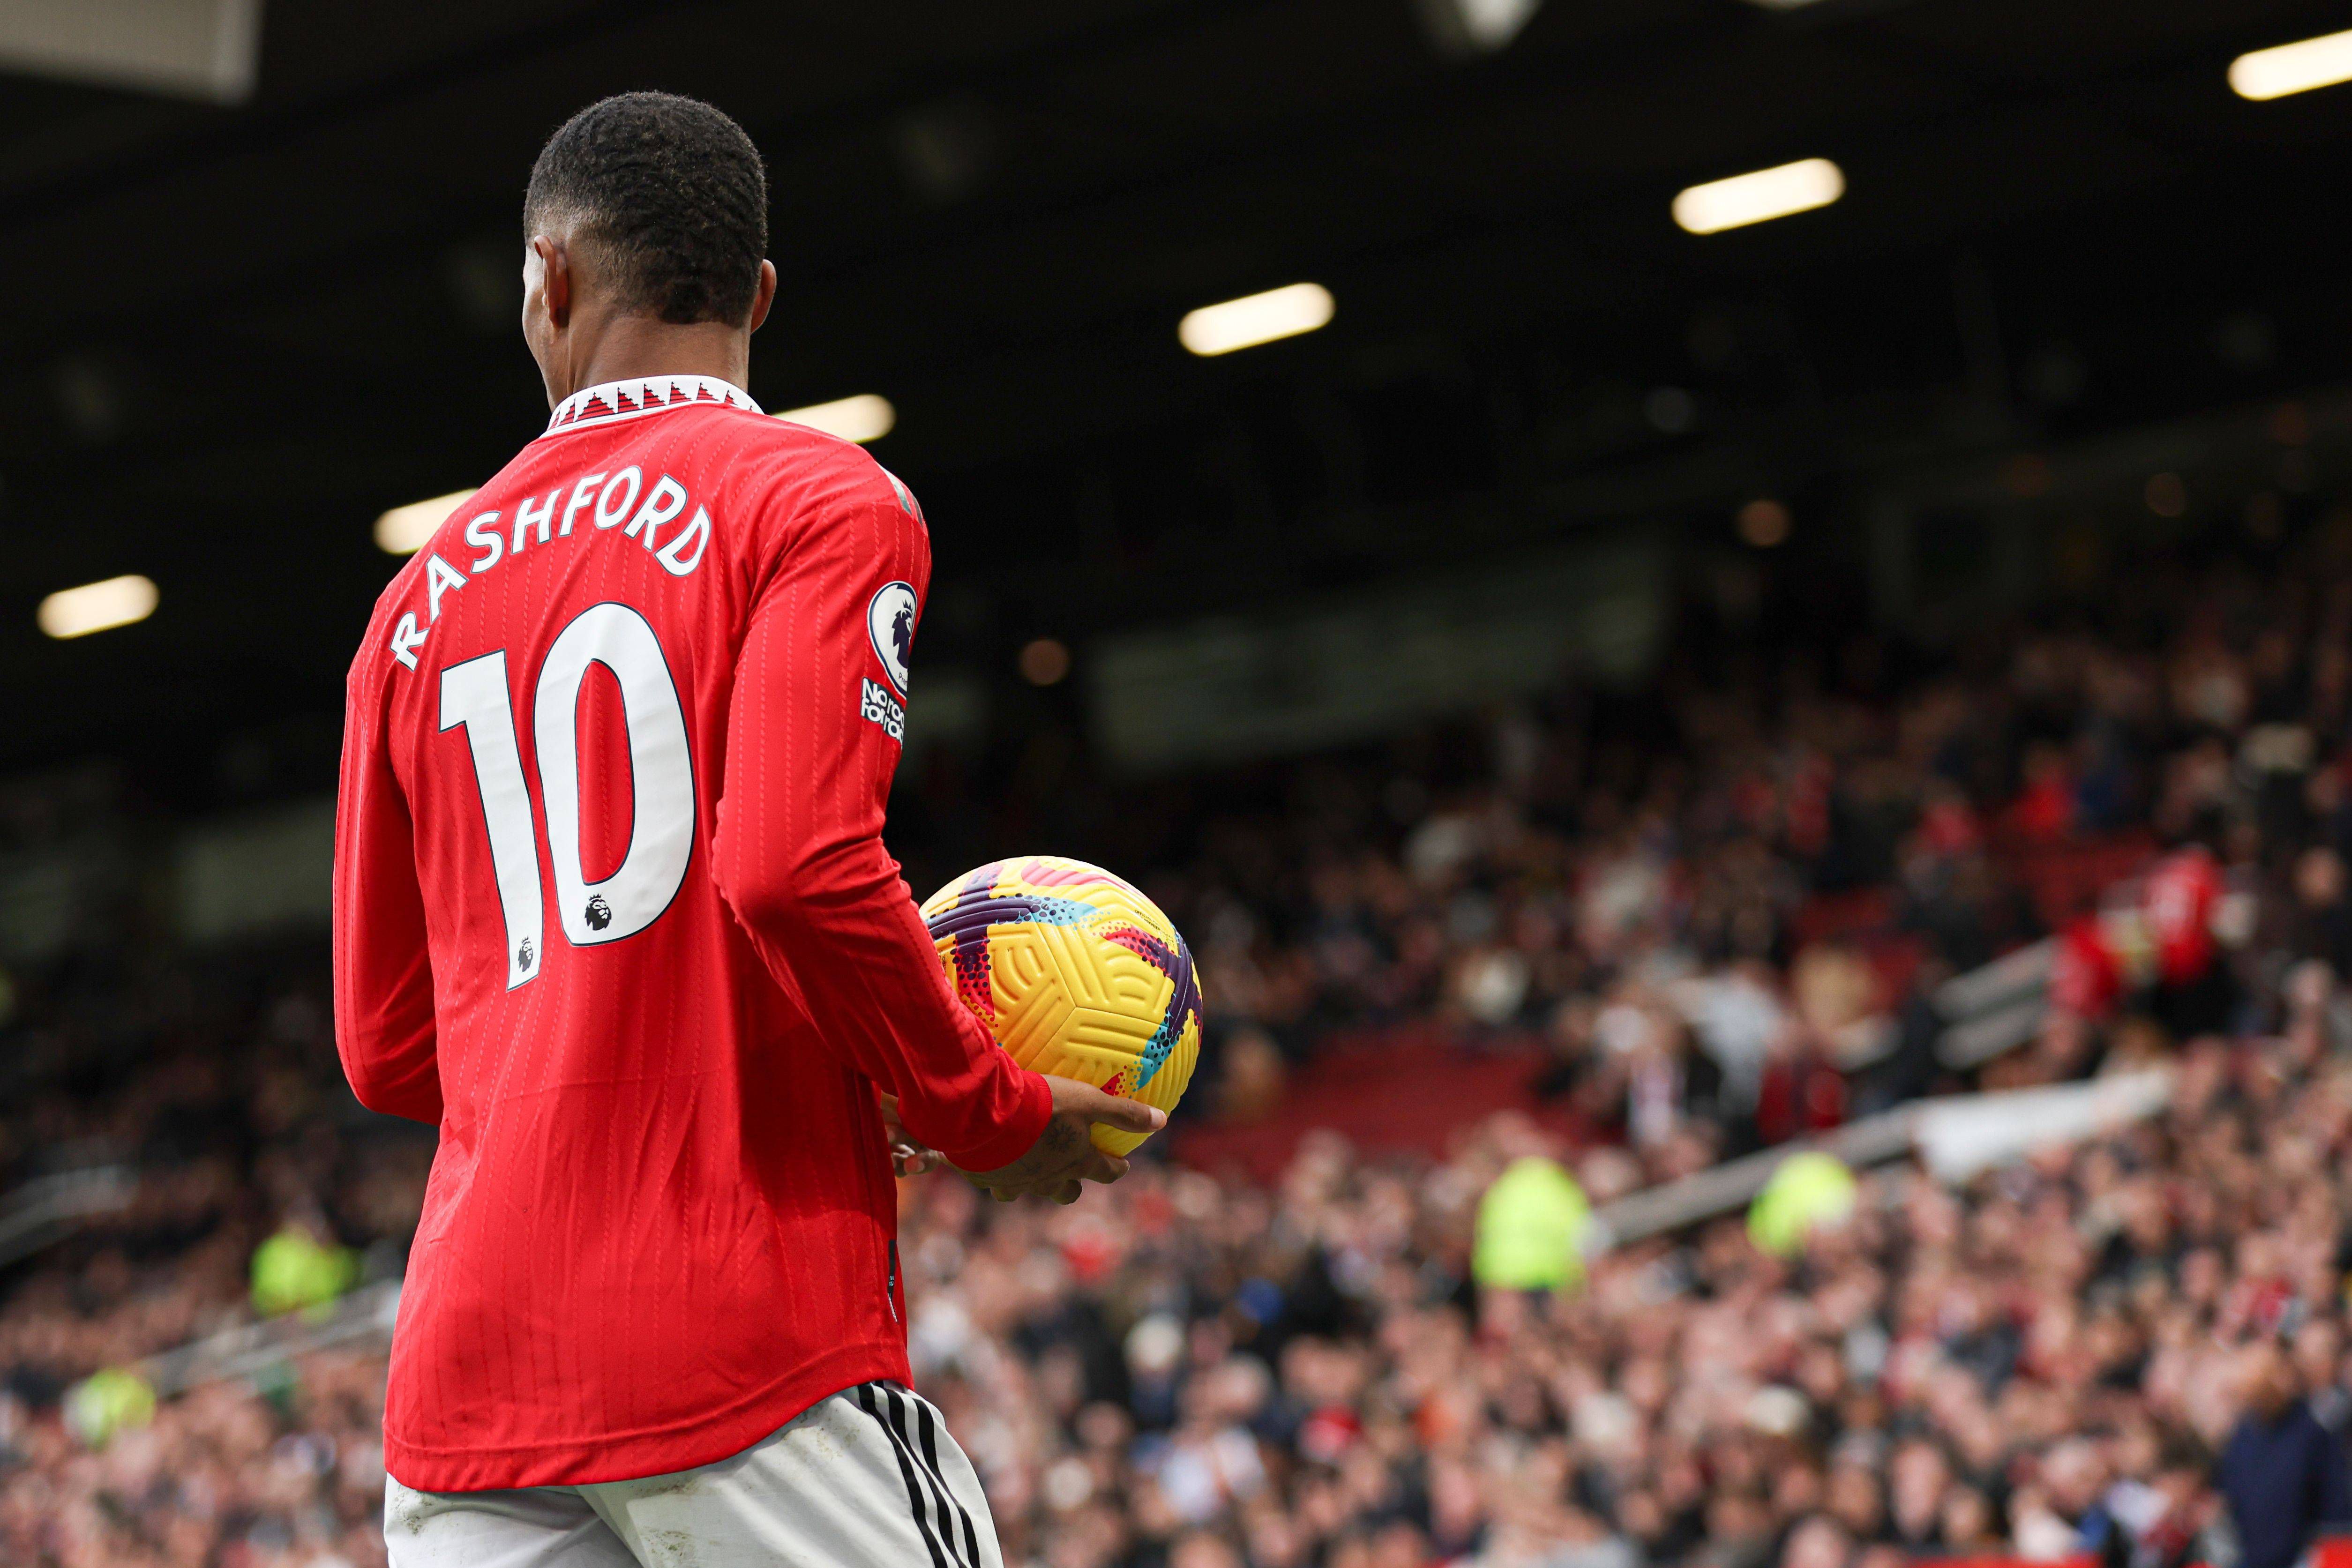 Marcus Rashford scored 30 goals in all competitions for Manchester United in the 2022/23 season